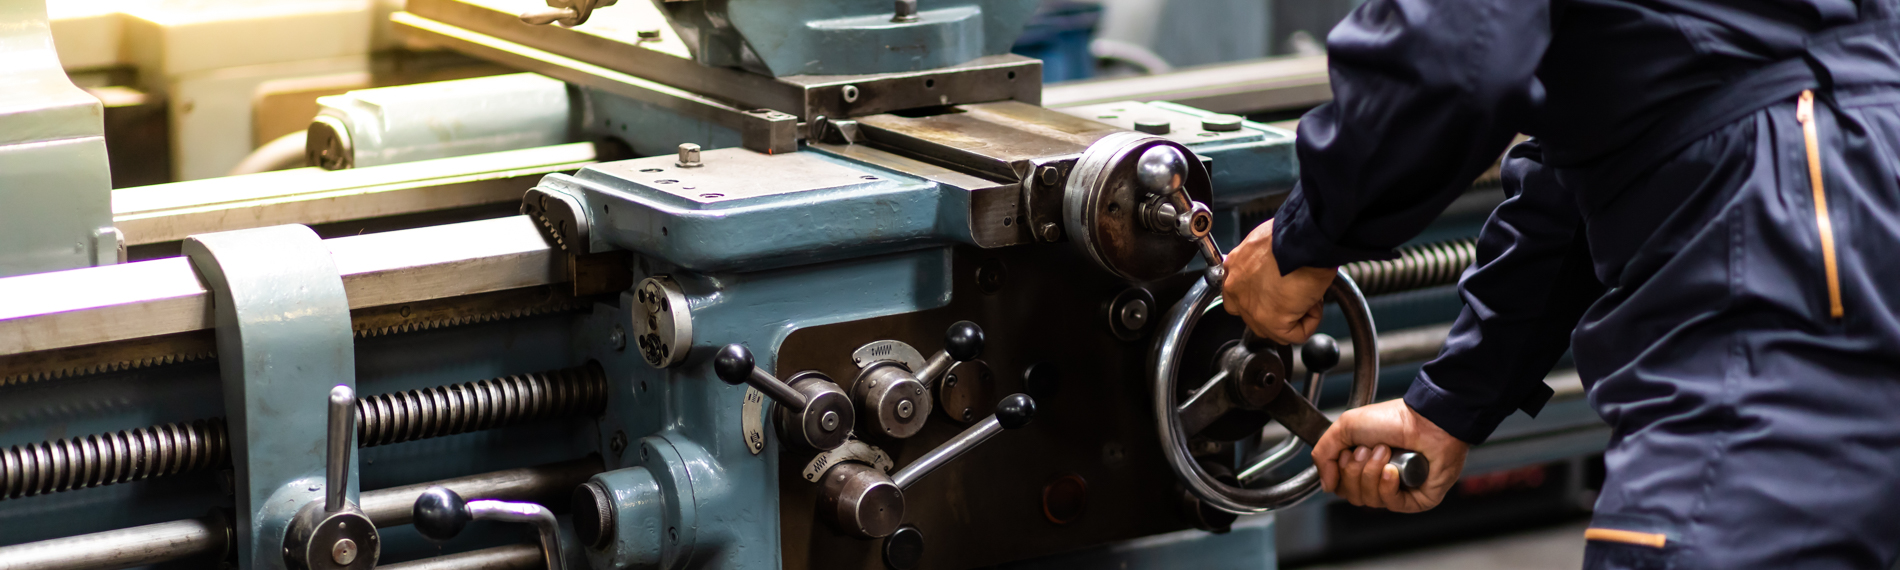 A student operates a metal lathe